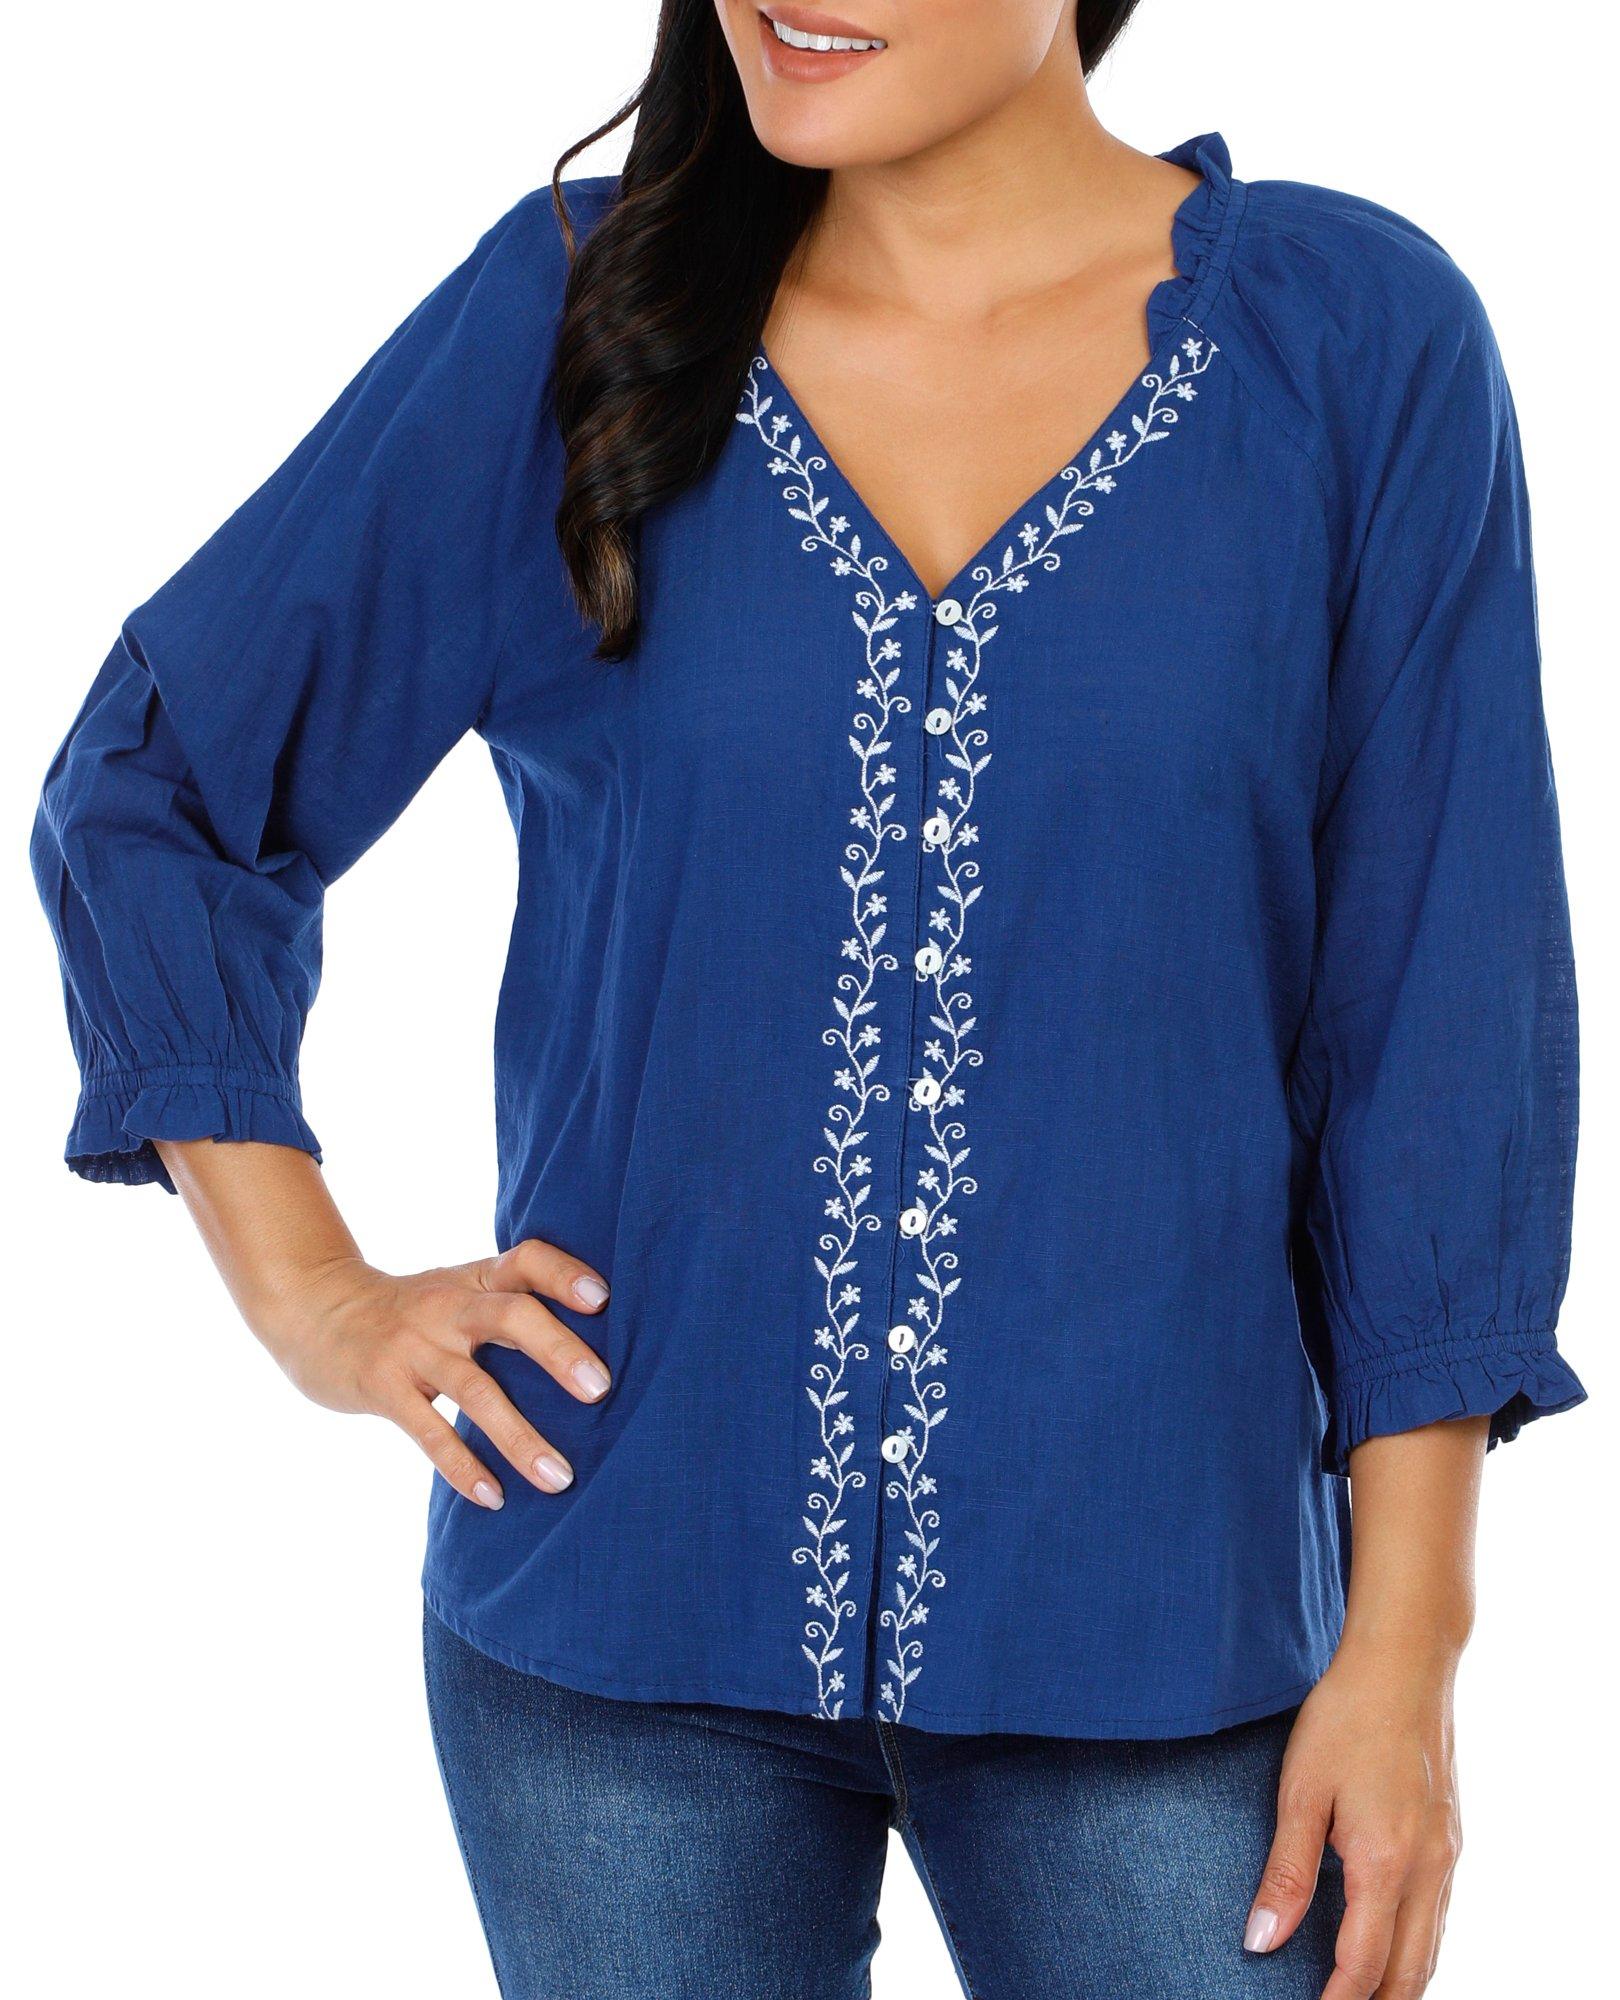 Women's Solid Embroidered Button Down Top